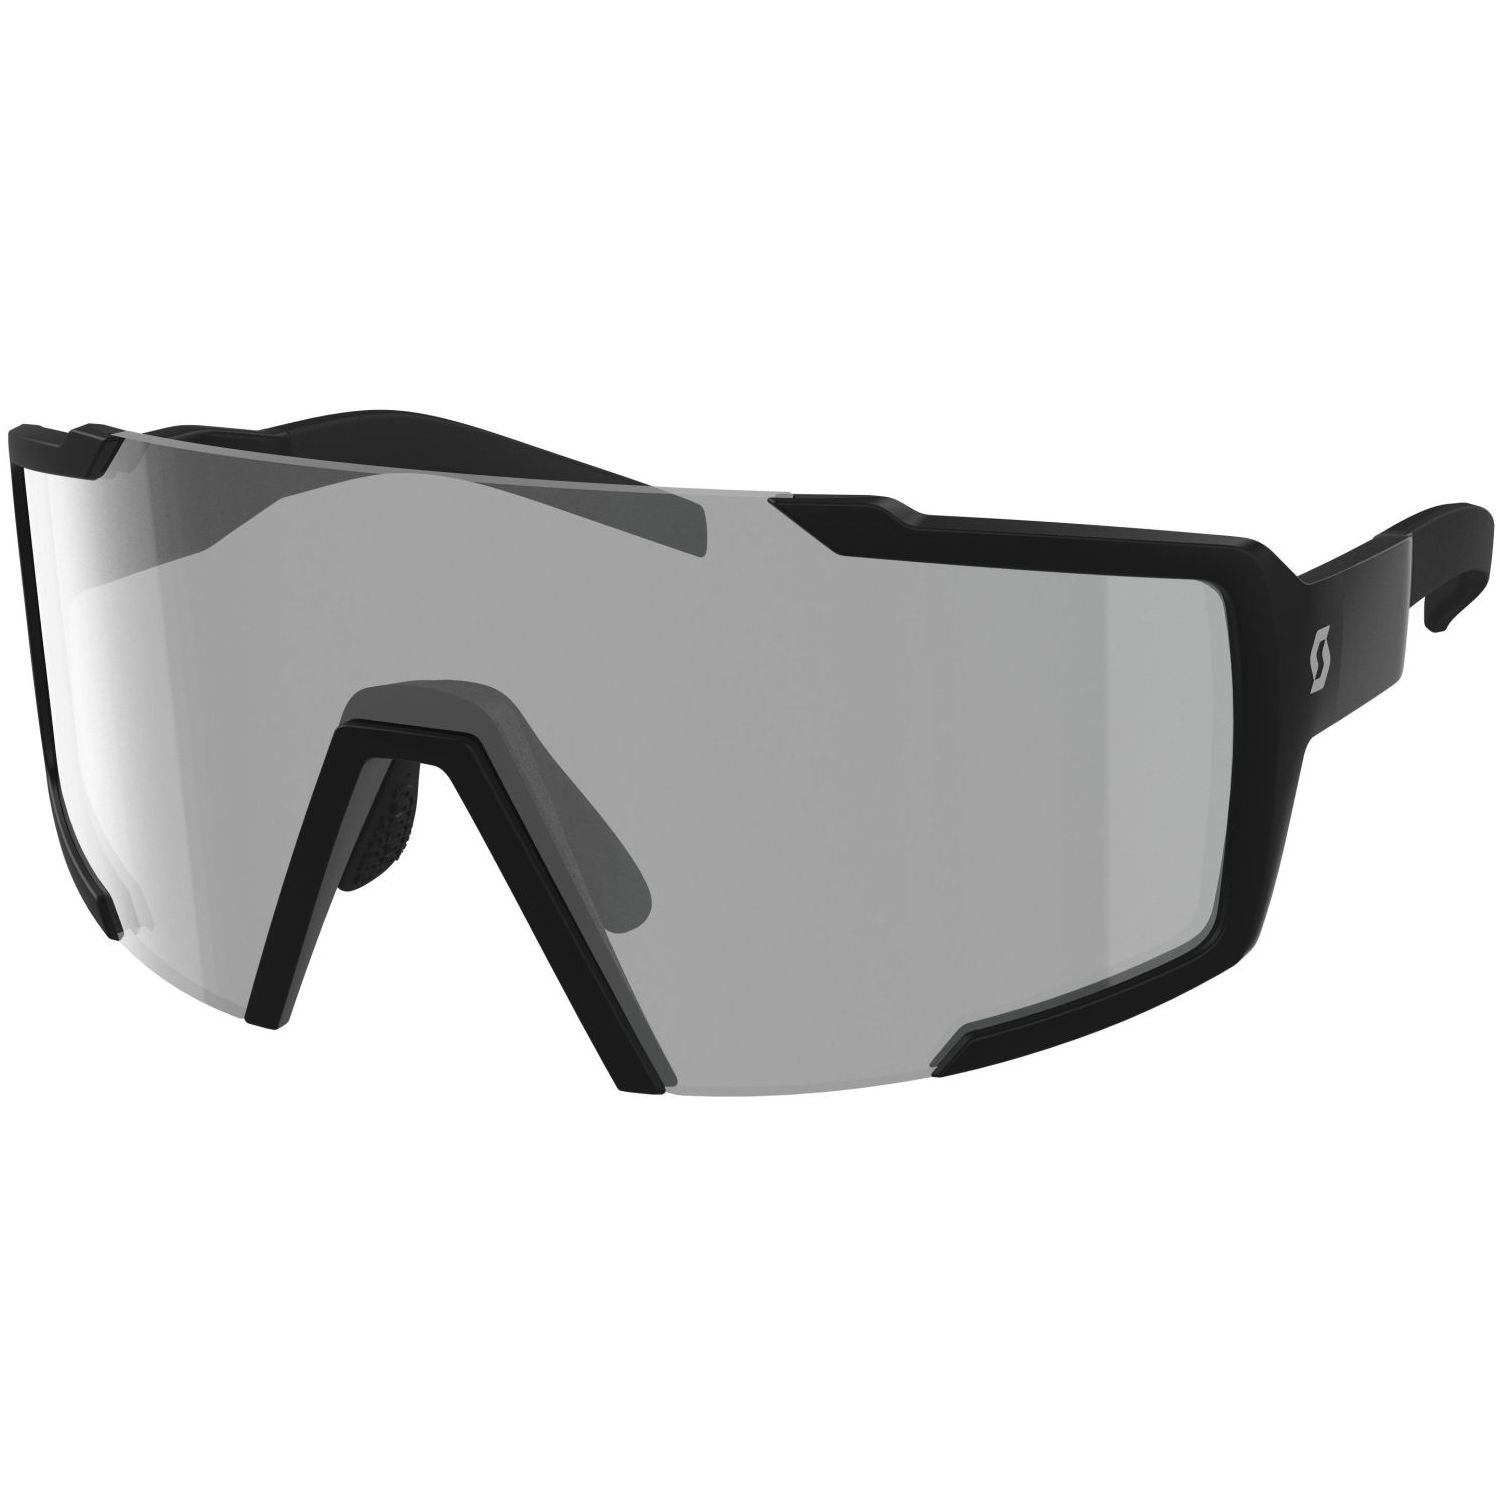 Disapproved Other places acute Gafas Scott Shield Ls on Sale, 59% OFF | a4accounting.com.au